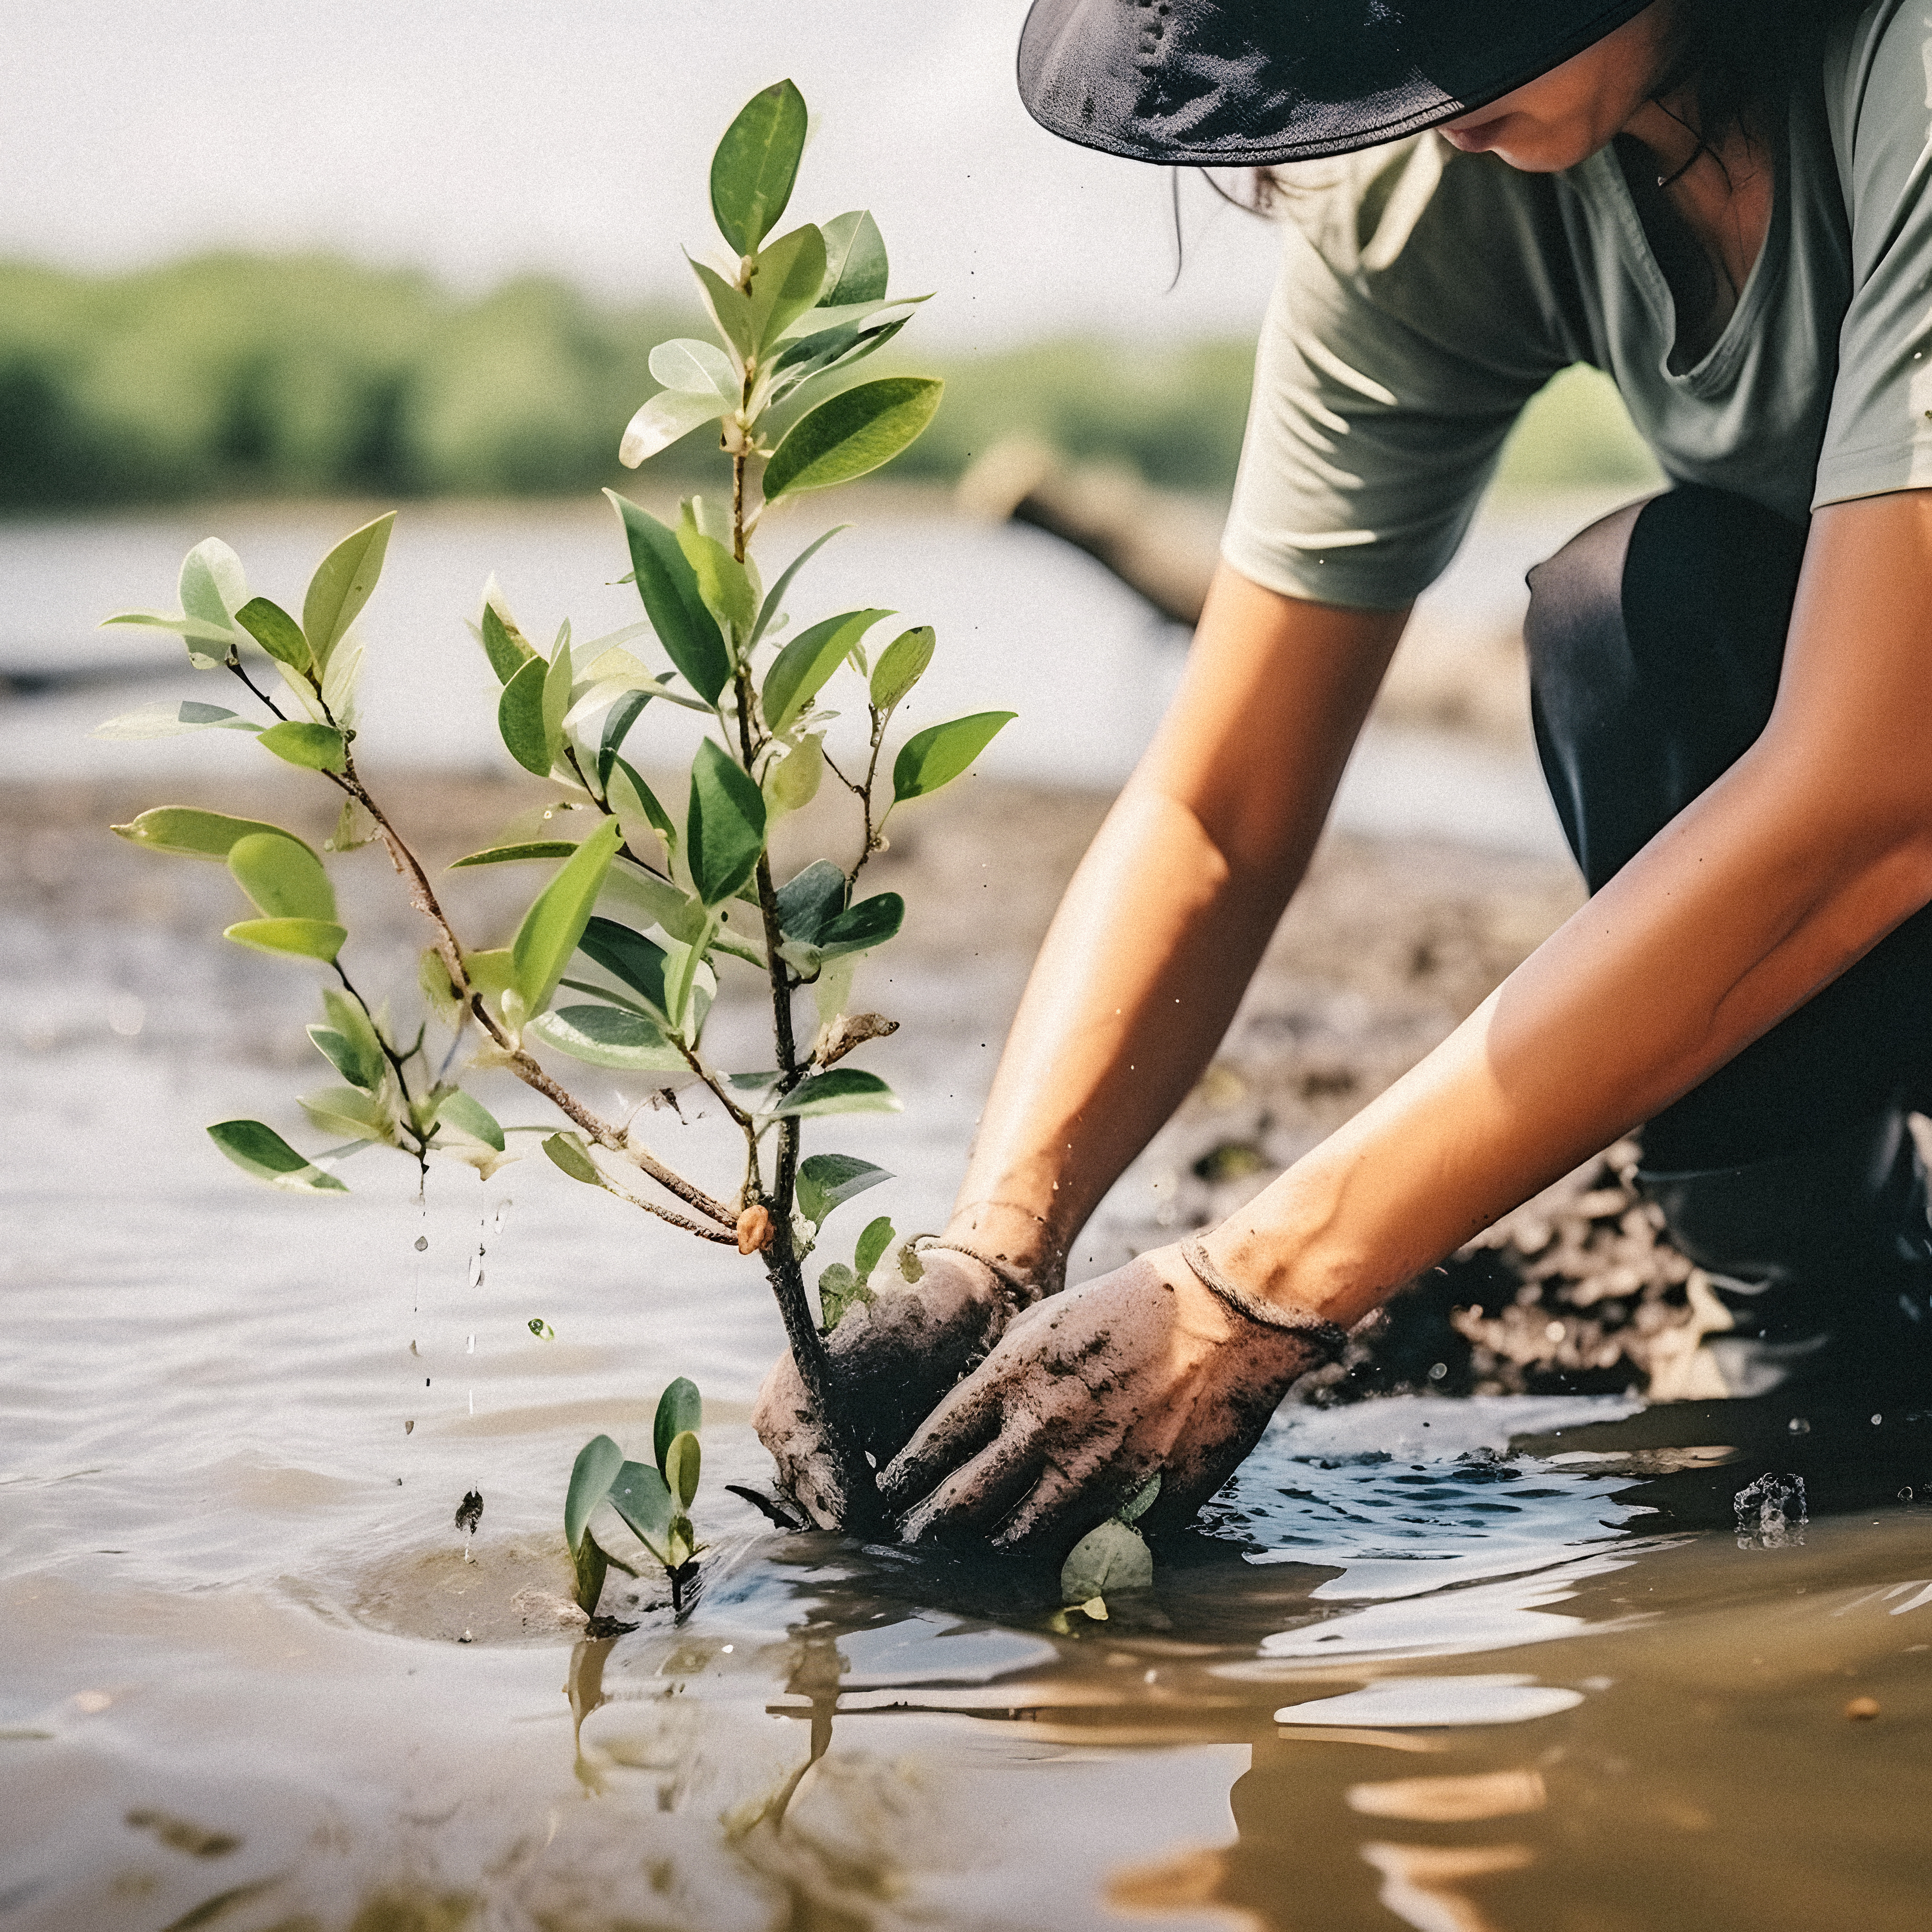 A young person plants a small tree in muddy ground